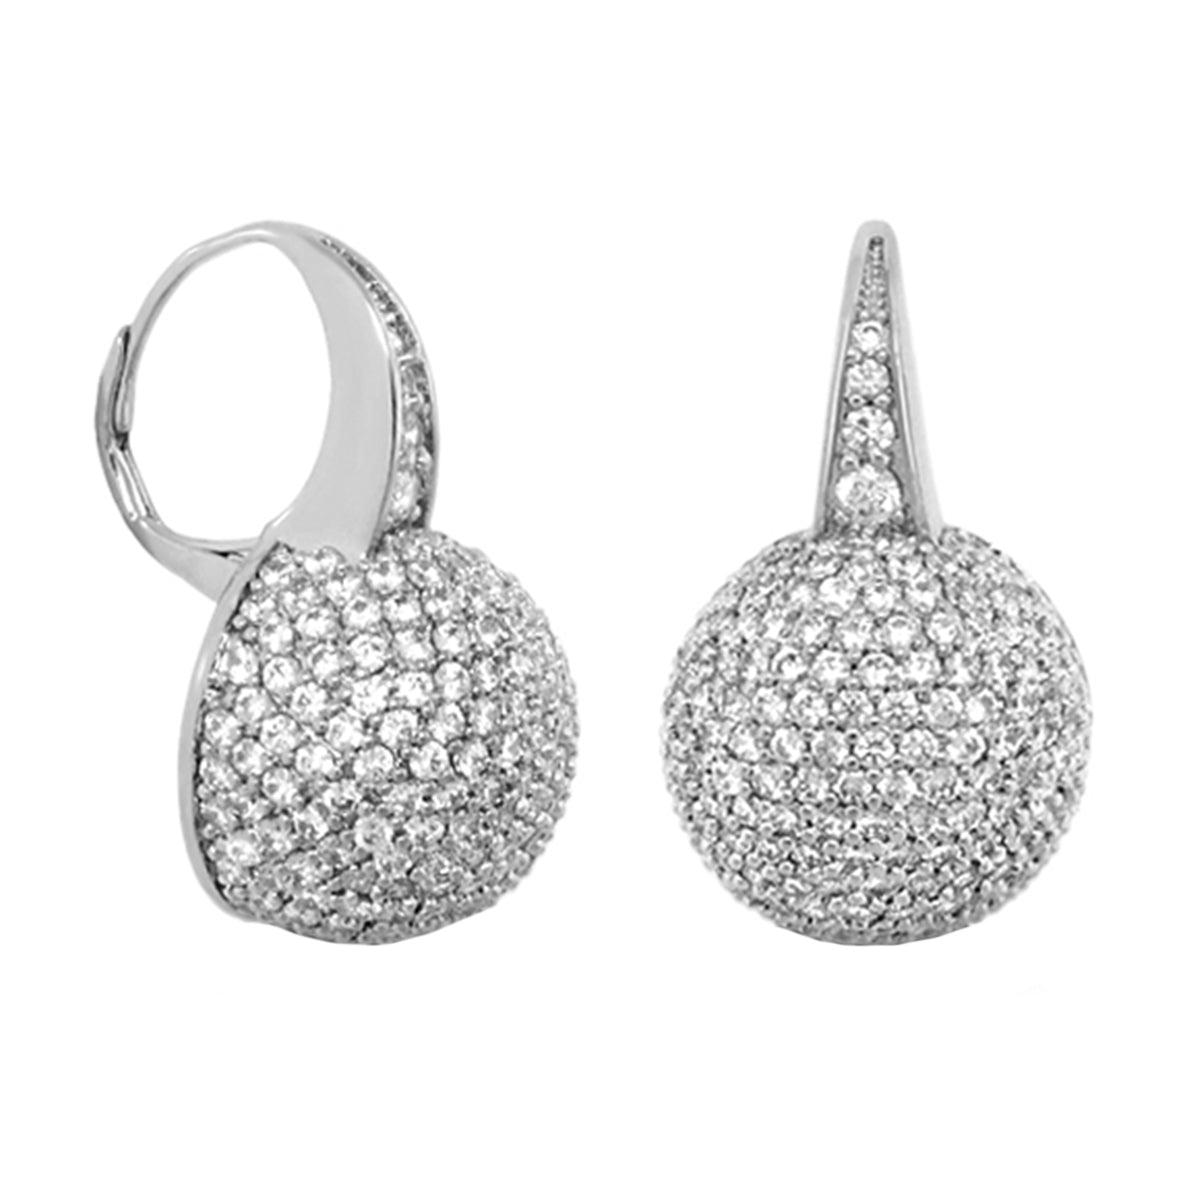 Glamour Pave Ball Earrings